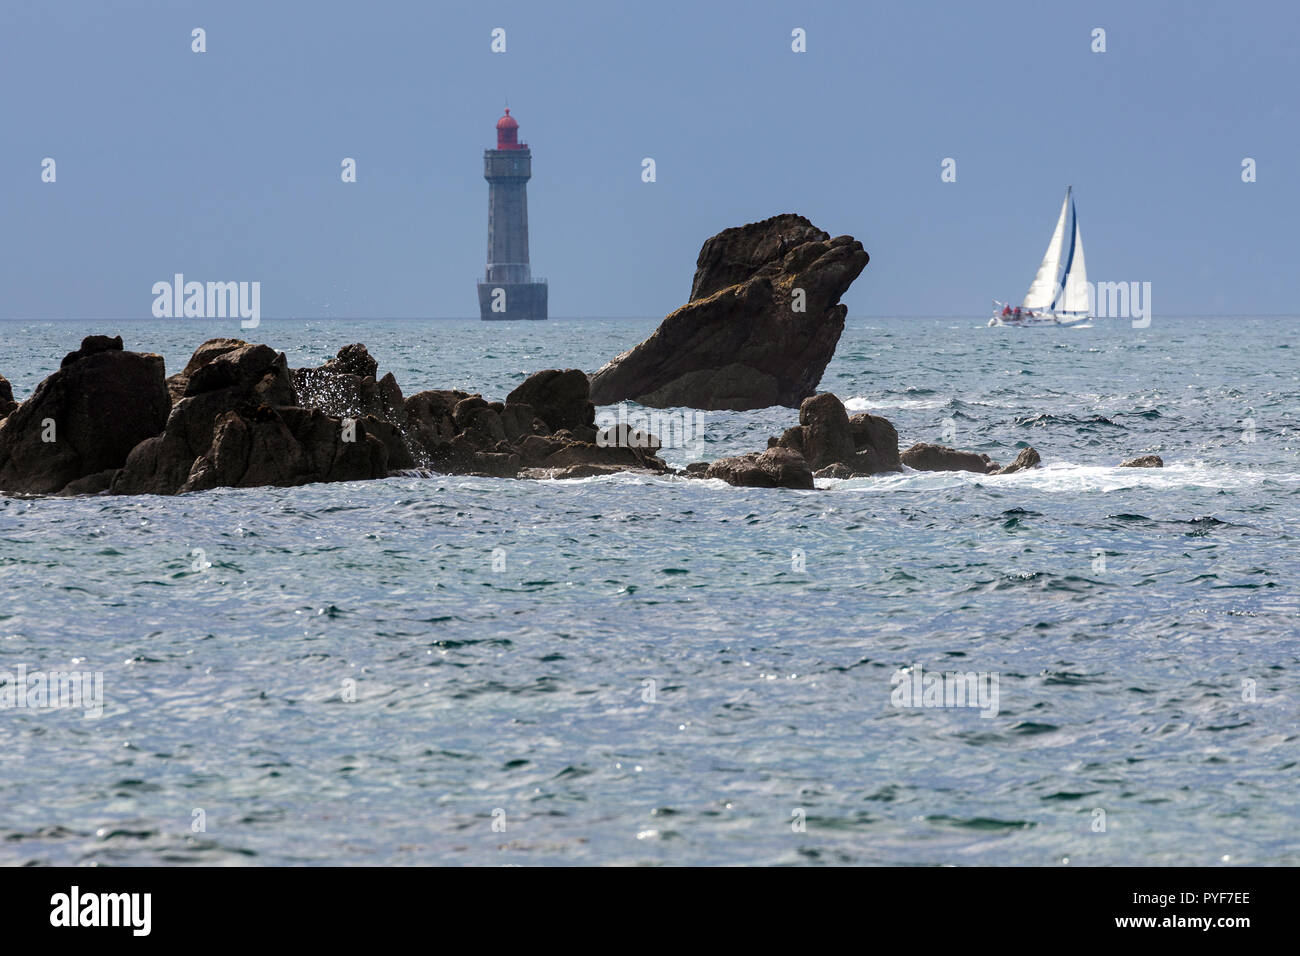 The Jument lighthouse and a sailboat, Ushant island, Brittany, France Stock Photo